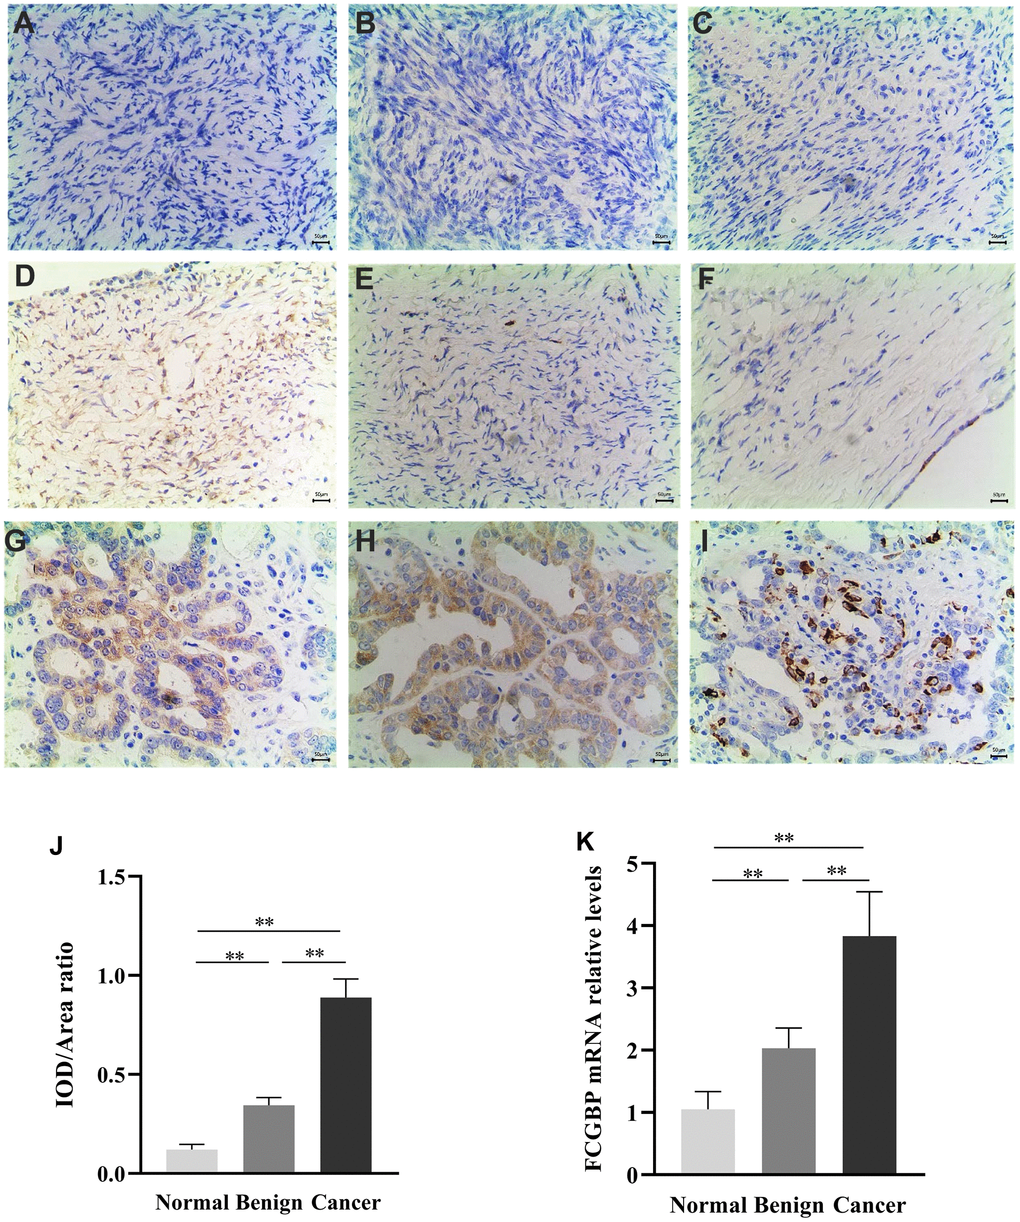 Expression of FCGBP in ovarian cancer tissues. (A–C) Representative images of immunohistochemistry showing FCGBP expression in normal ovarian tissues. (D–F) Representative images of immunohistochemistry showing FCGBP expression in benign ovarian cancer tissues. (G–I) Representative immunohistochemistry images showing FCGBP expression in ovarian cancer tissues. (J) IOD/area ratio of the indicated immunohistochemistry images. (K) qRT-PCR analysis of FCGBP expression in the indicated groups.